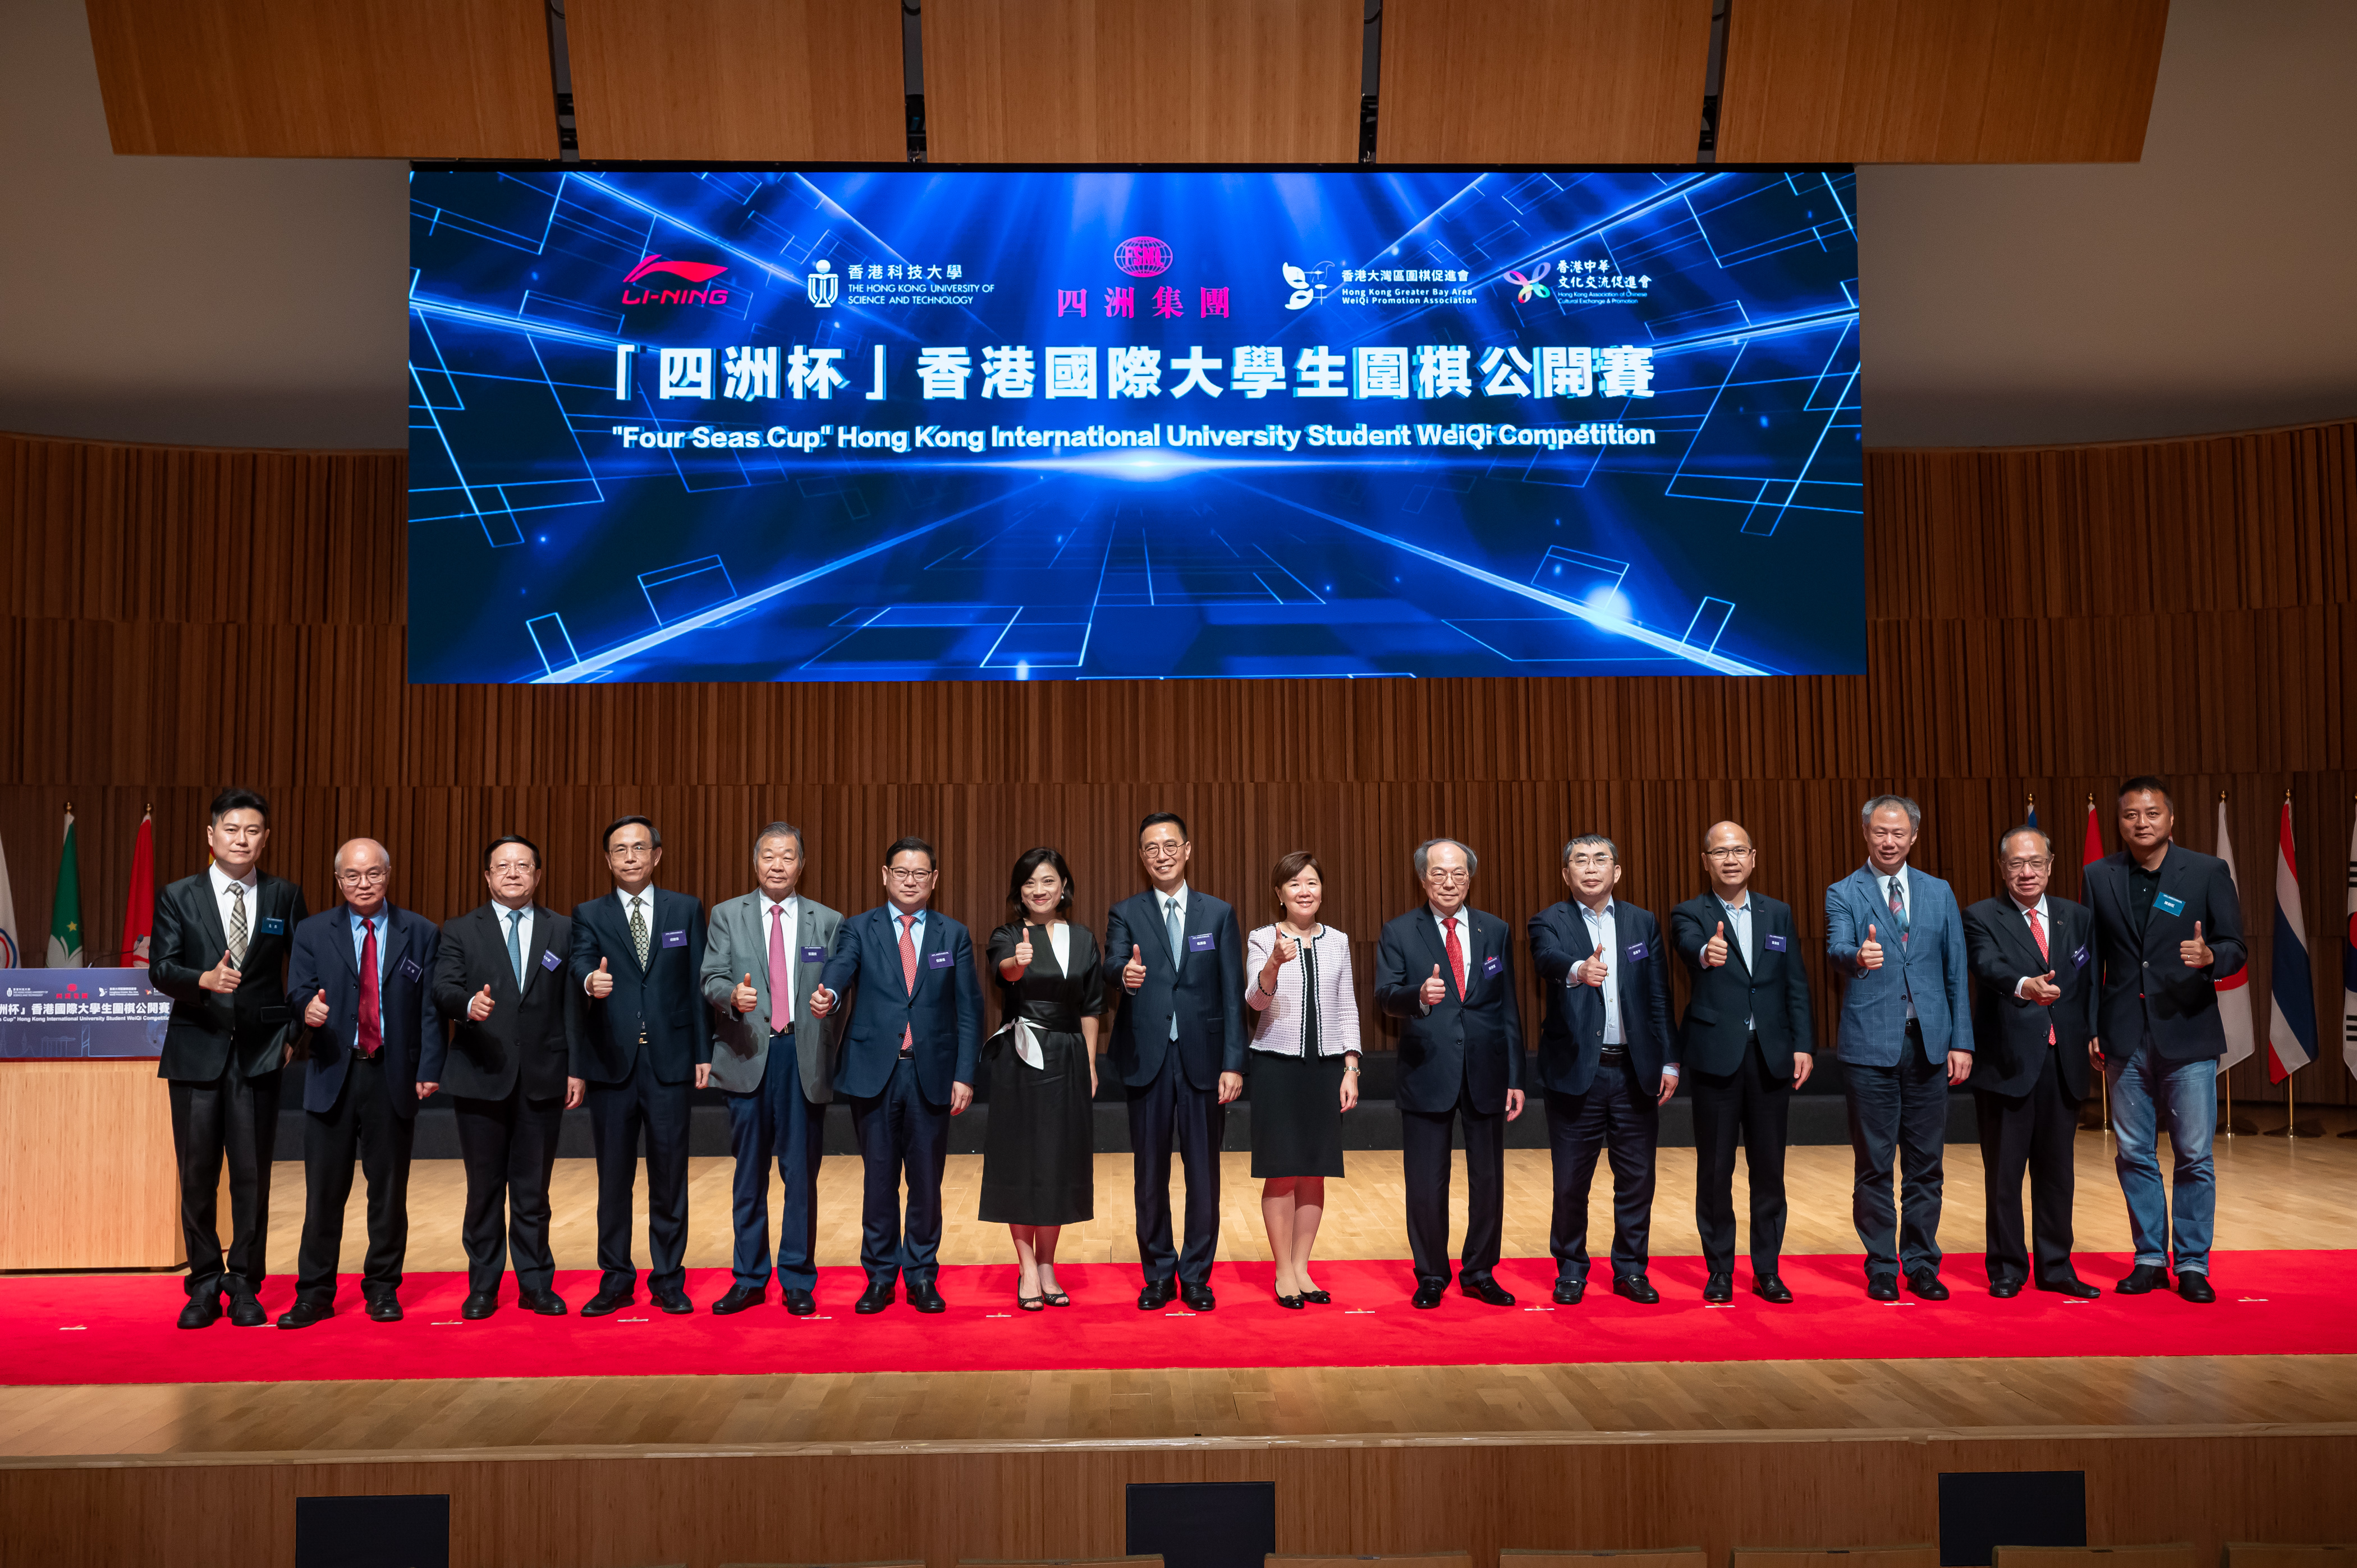 A group photo of Deputy Director of Department of Publicity, Culture and Sports Affairs of the Liaison Office of the Central People’s Government in the HKSAR Mr. ZHANG Guoyi (sixth left); Secretary for Culture, Sports and Tourism of the HKSAR Government Mr. Kevin YEUNG Yun-Hung (center); HKUST President Prof. Nancy IP (seventh right); HKUST Vice-president for institutional Advancement Prof. WANG yang (second left); Senior Advisor to the President Prof. Albert IP Yuk-Keung (second right);  Dr. Stephen TAI, C